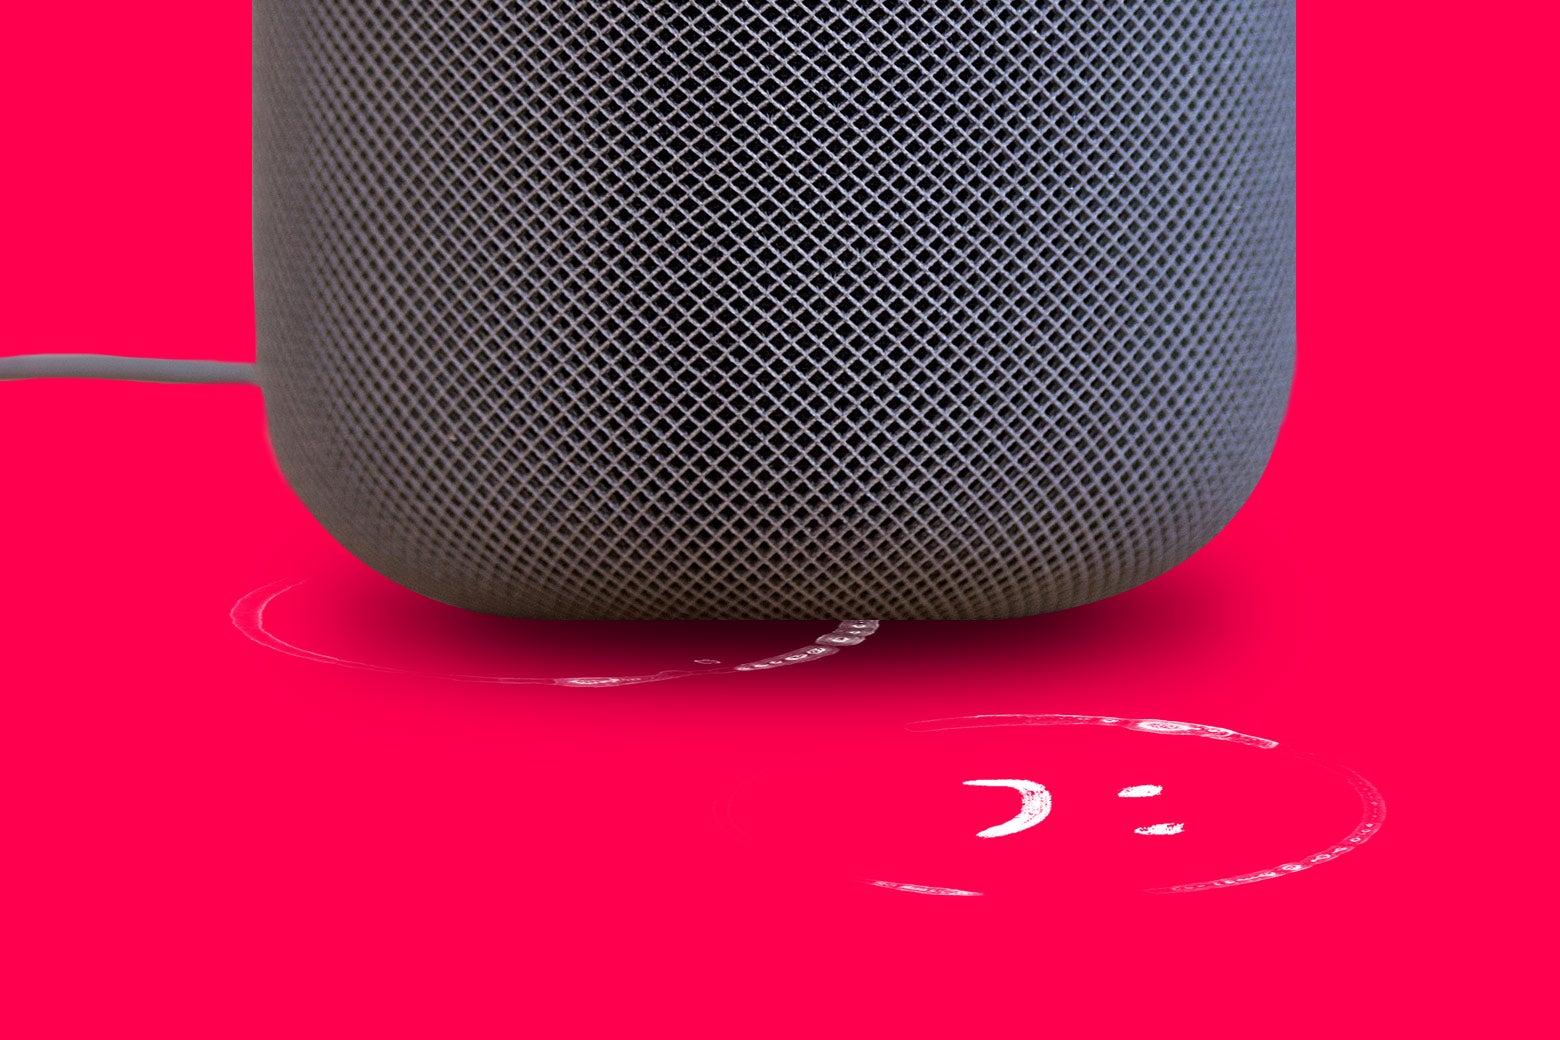 Apple HomePod speakers are leaving marks on some surfaces.